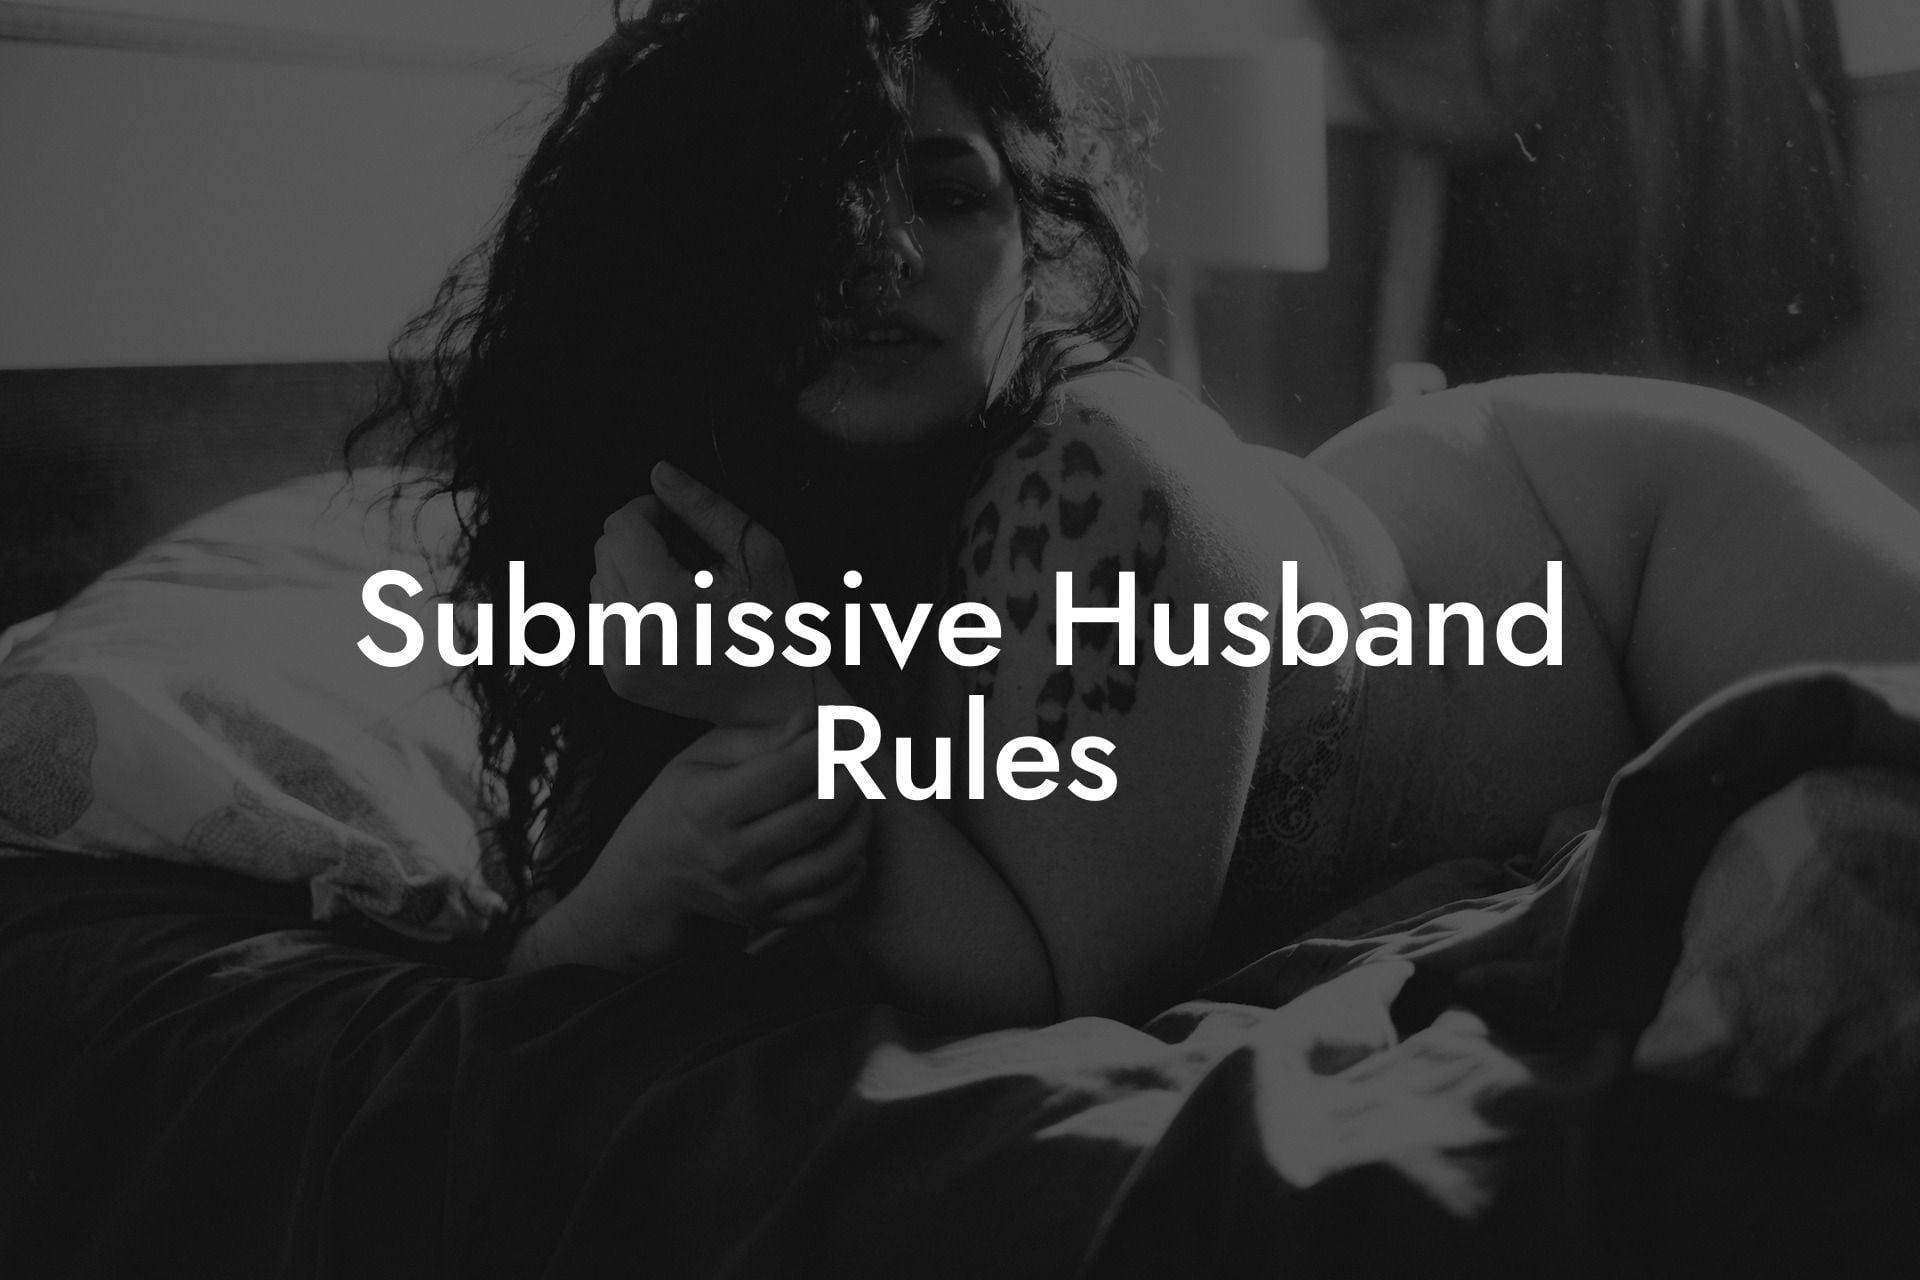 Submissive Husband Rules